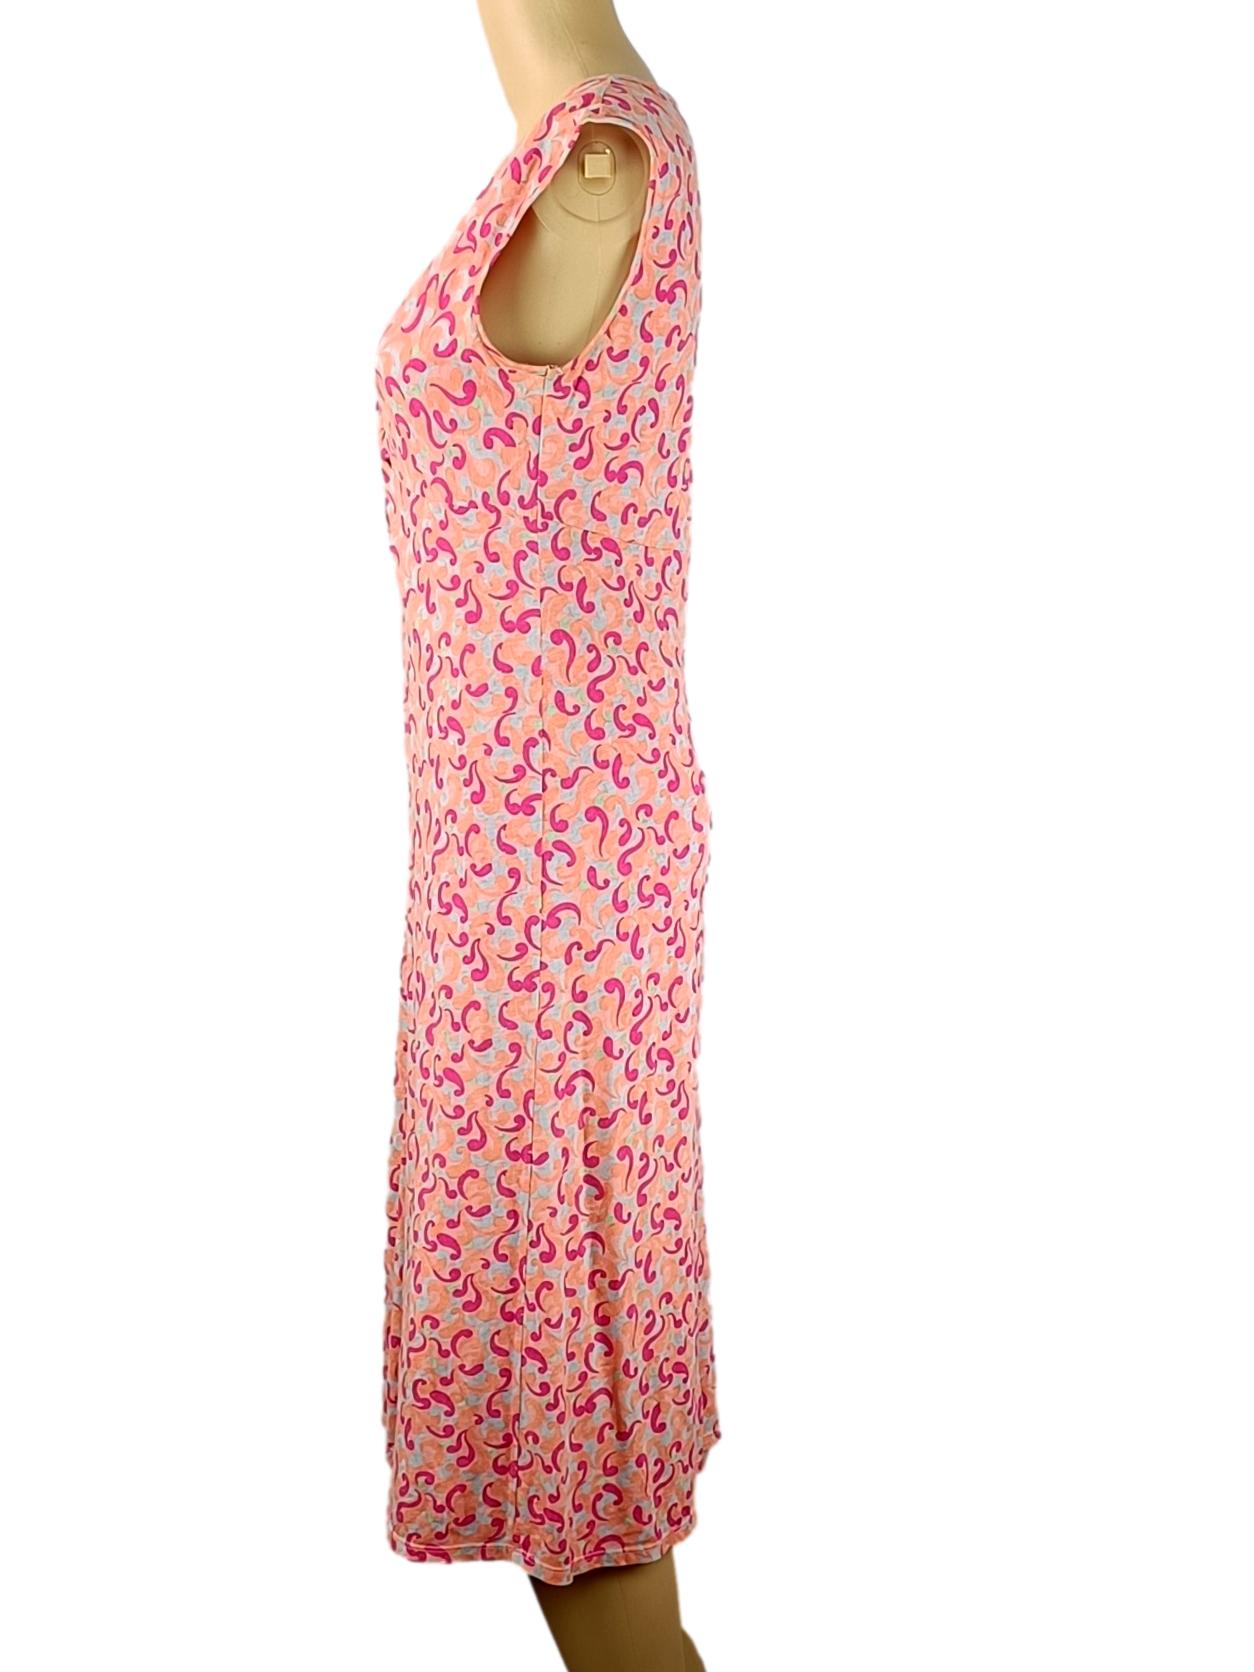 Robe Free People - Taille M